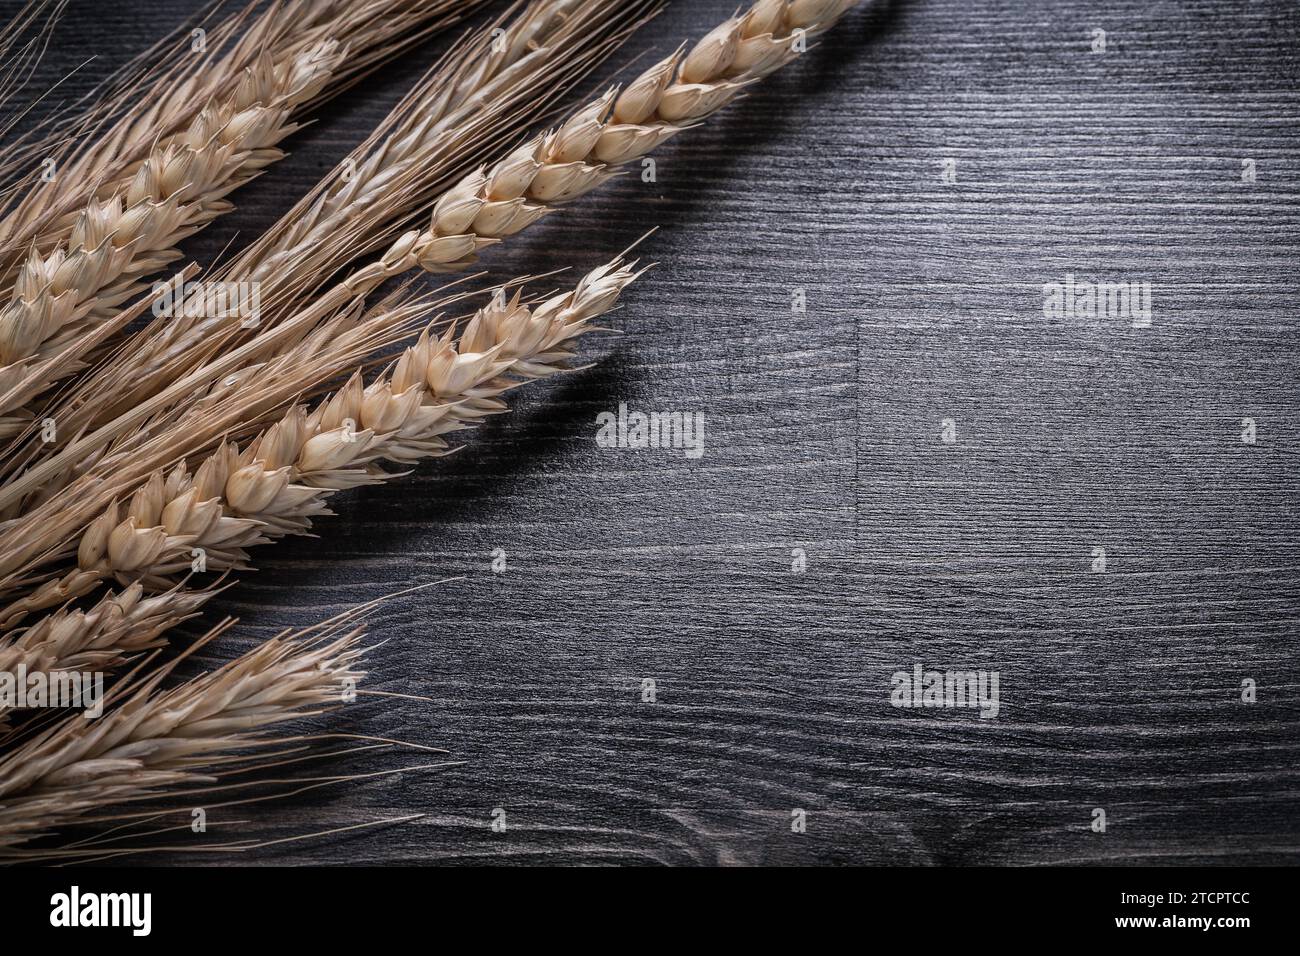 Bundle of wheat rye ears eating and drinking concept Stock Photo